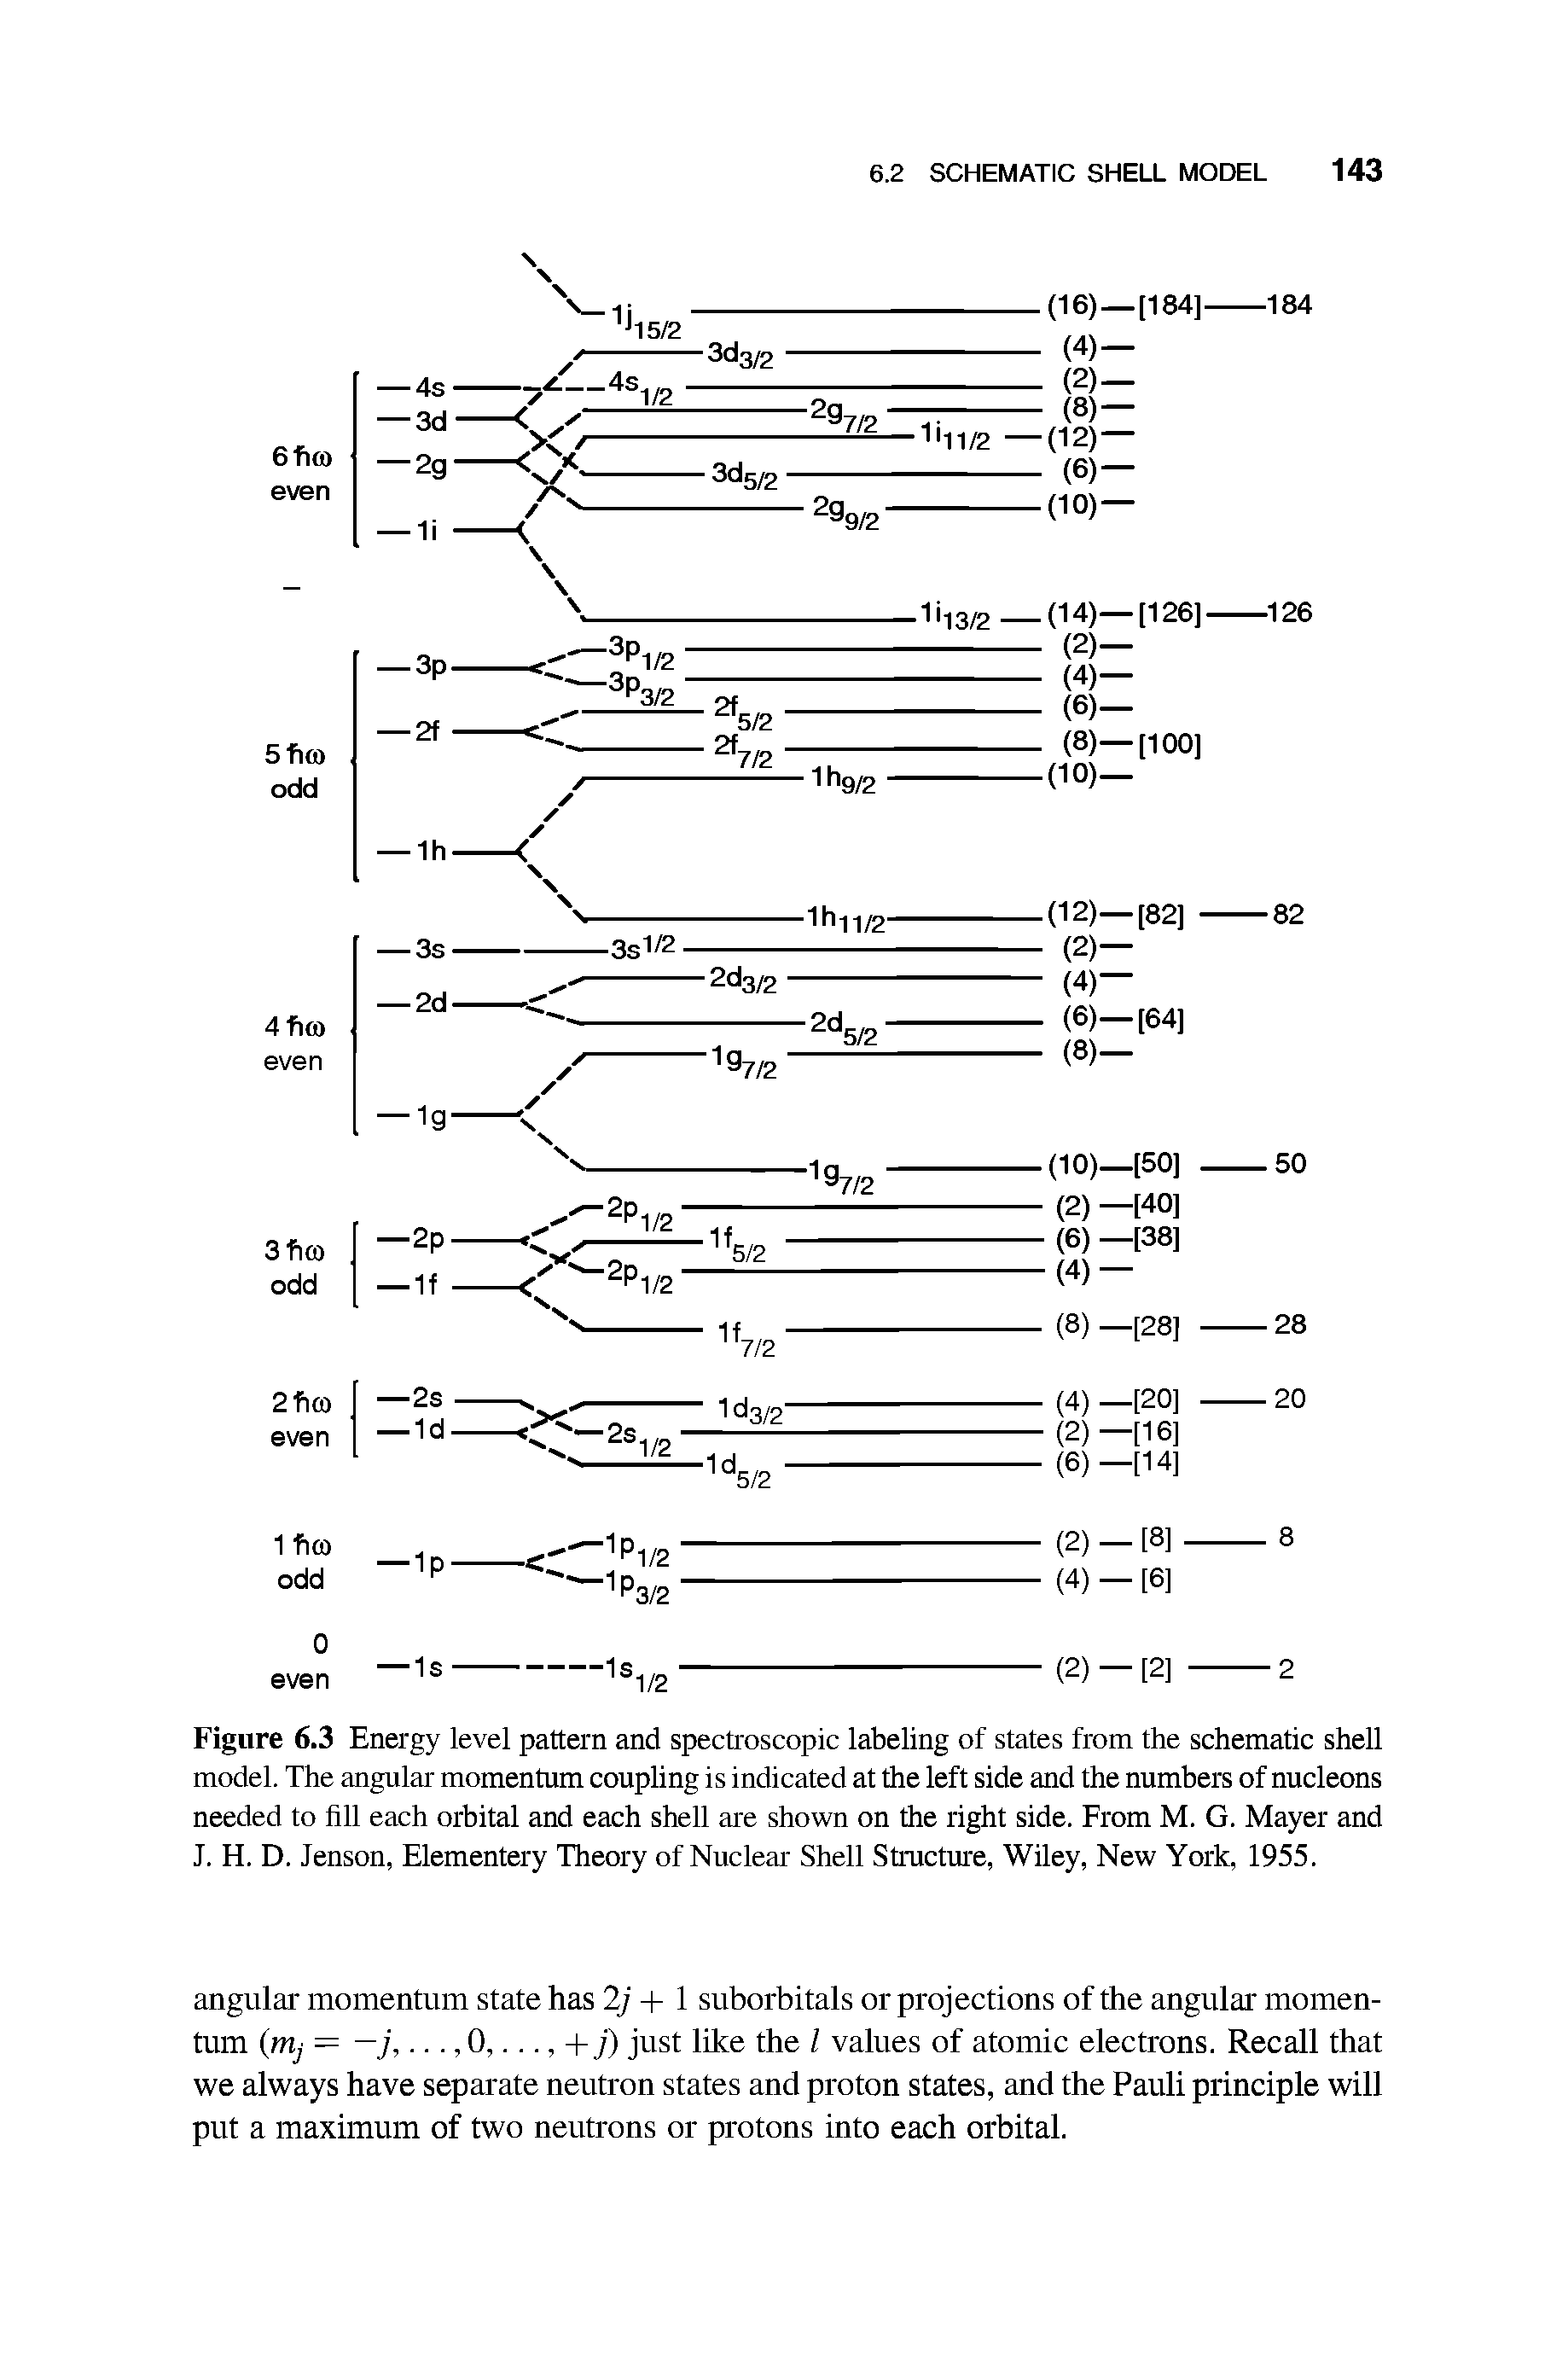 Figure 6.3 Energy level pattern and spectroscopic labeling of states from the schematic shell model. The angular momentum coupling is indicated at the left side and the numbers of nucleons needed to fill each orbital and each shell are shown on the right side. From M. G. Mayer and J. H. D. Jenson, Elementery Theory of Nuclear Shell Structure, Wiley, New York, 1955.